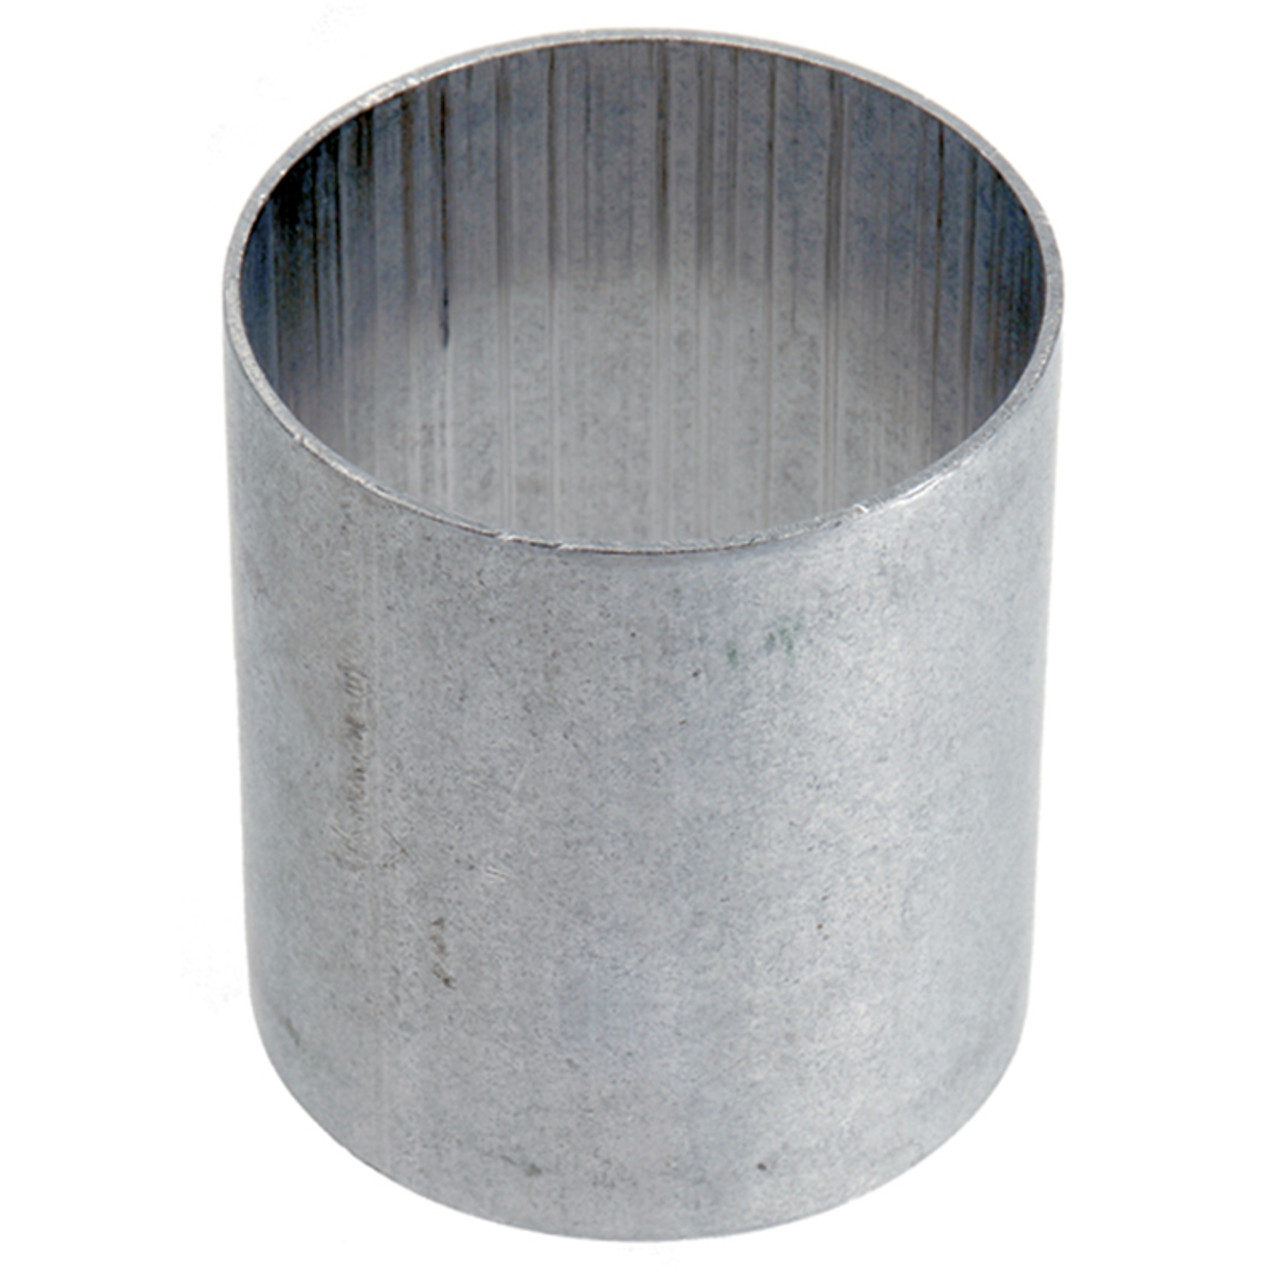 1.25" Stainless Steel Hose Sleeve   G3SS-125